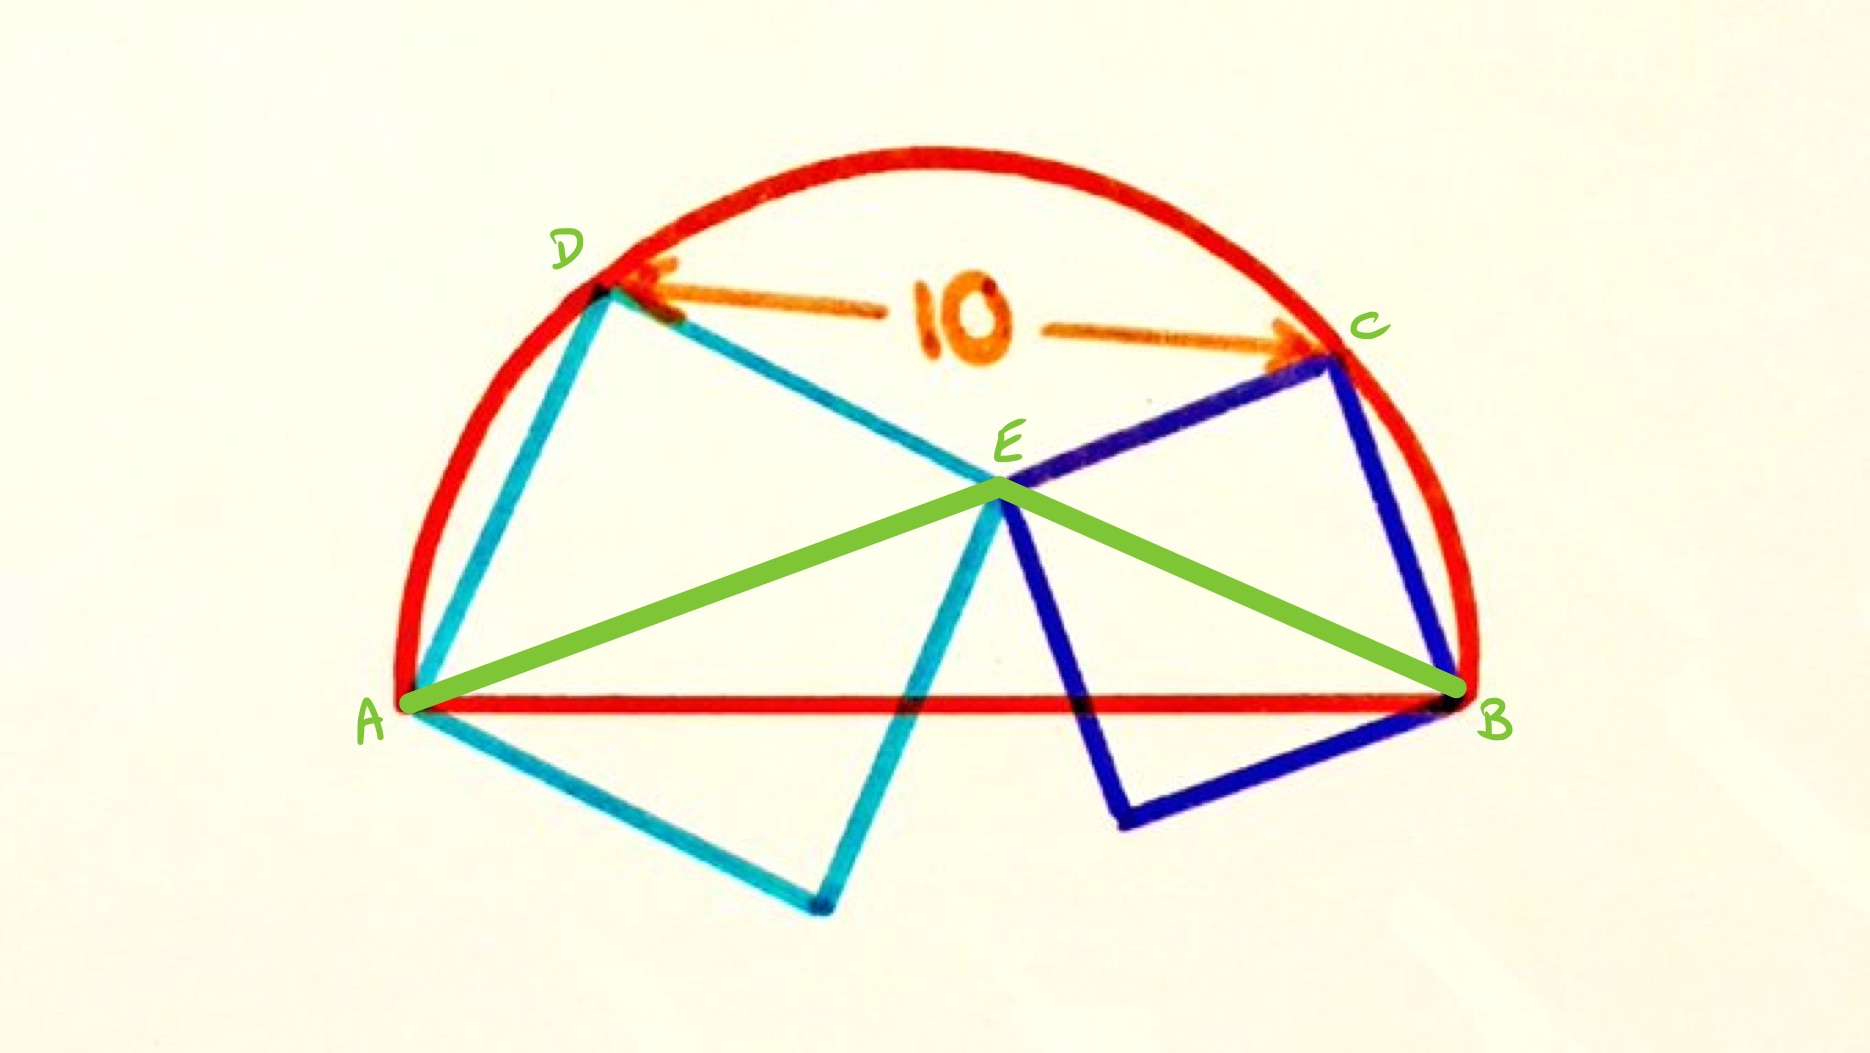 Two squares overlapping a semi-circle labelled